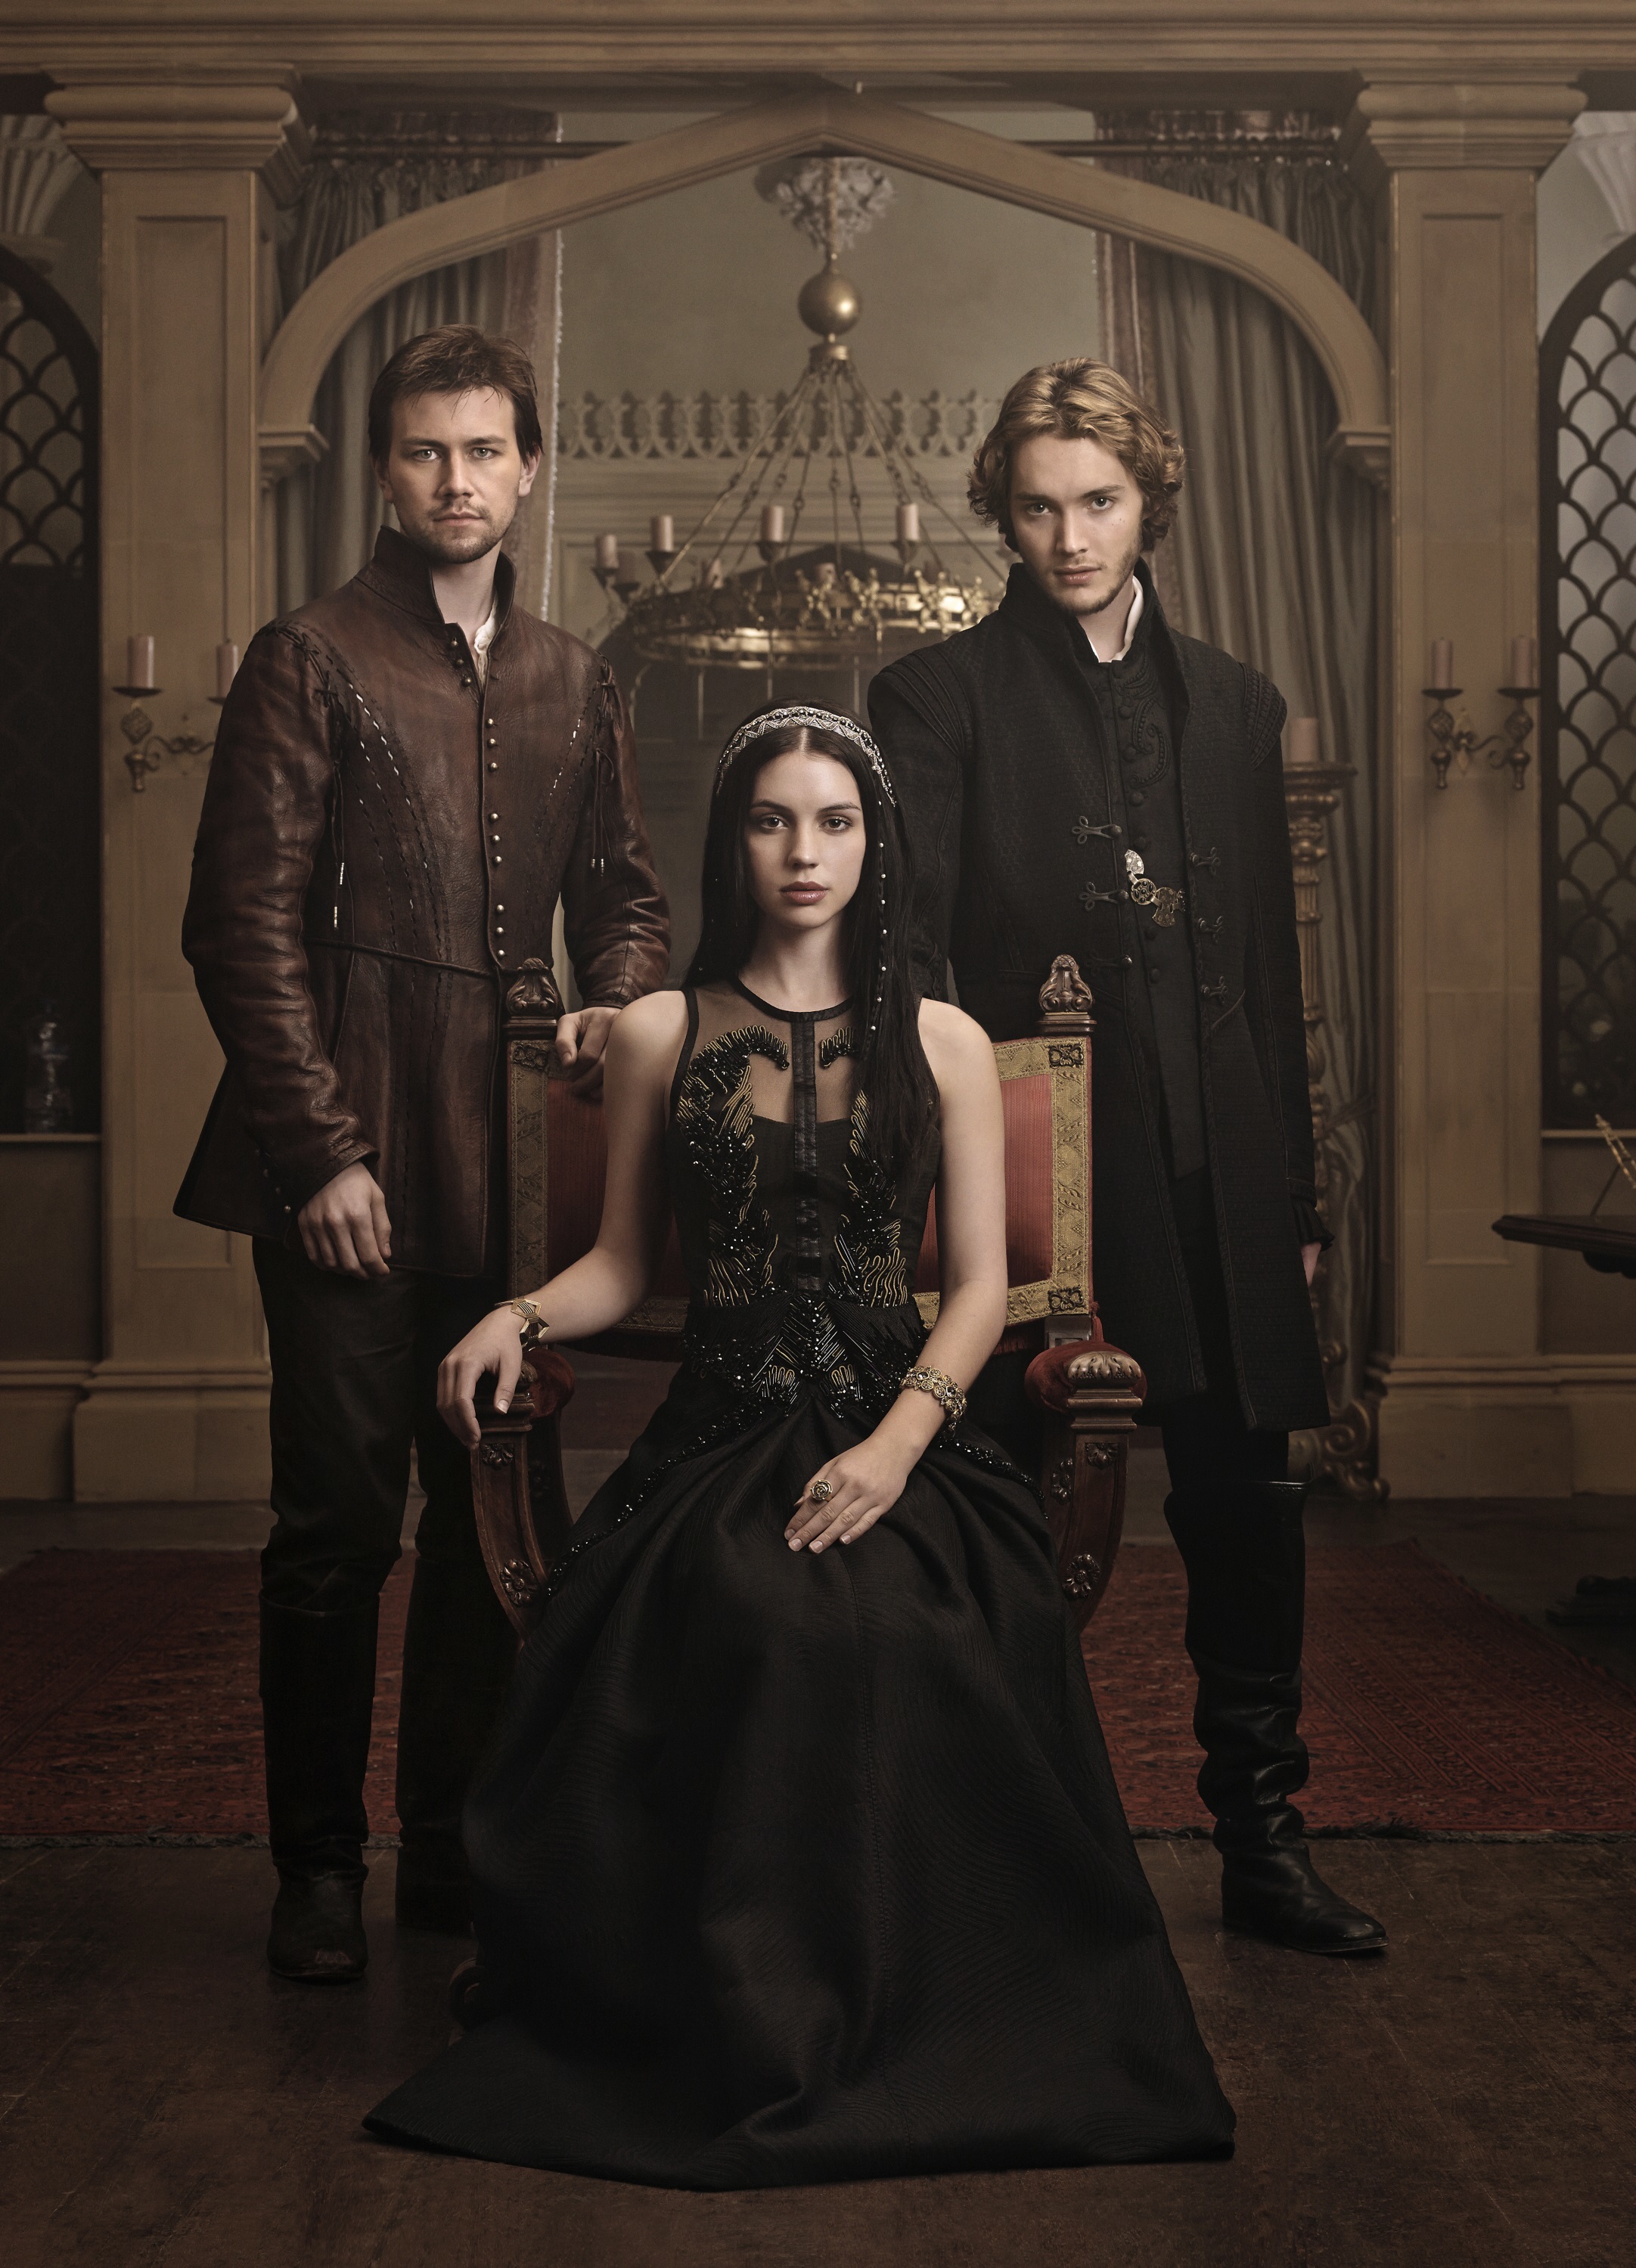 <p>Another drama loosely based on actual historical figures is the CW series "Reign," which told the story of young King Francis II of France (Toby Regbo, right) and his young bride, Queen Mary Stuart (Adelaide Kane, center) in the mid-16th century. Filled with all the intrigue, drama and deceit of a royal court, the show managed to hold its own for four strong seasons before being canceled in 2017.</p>